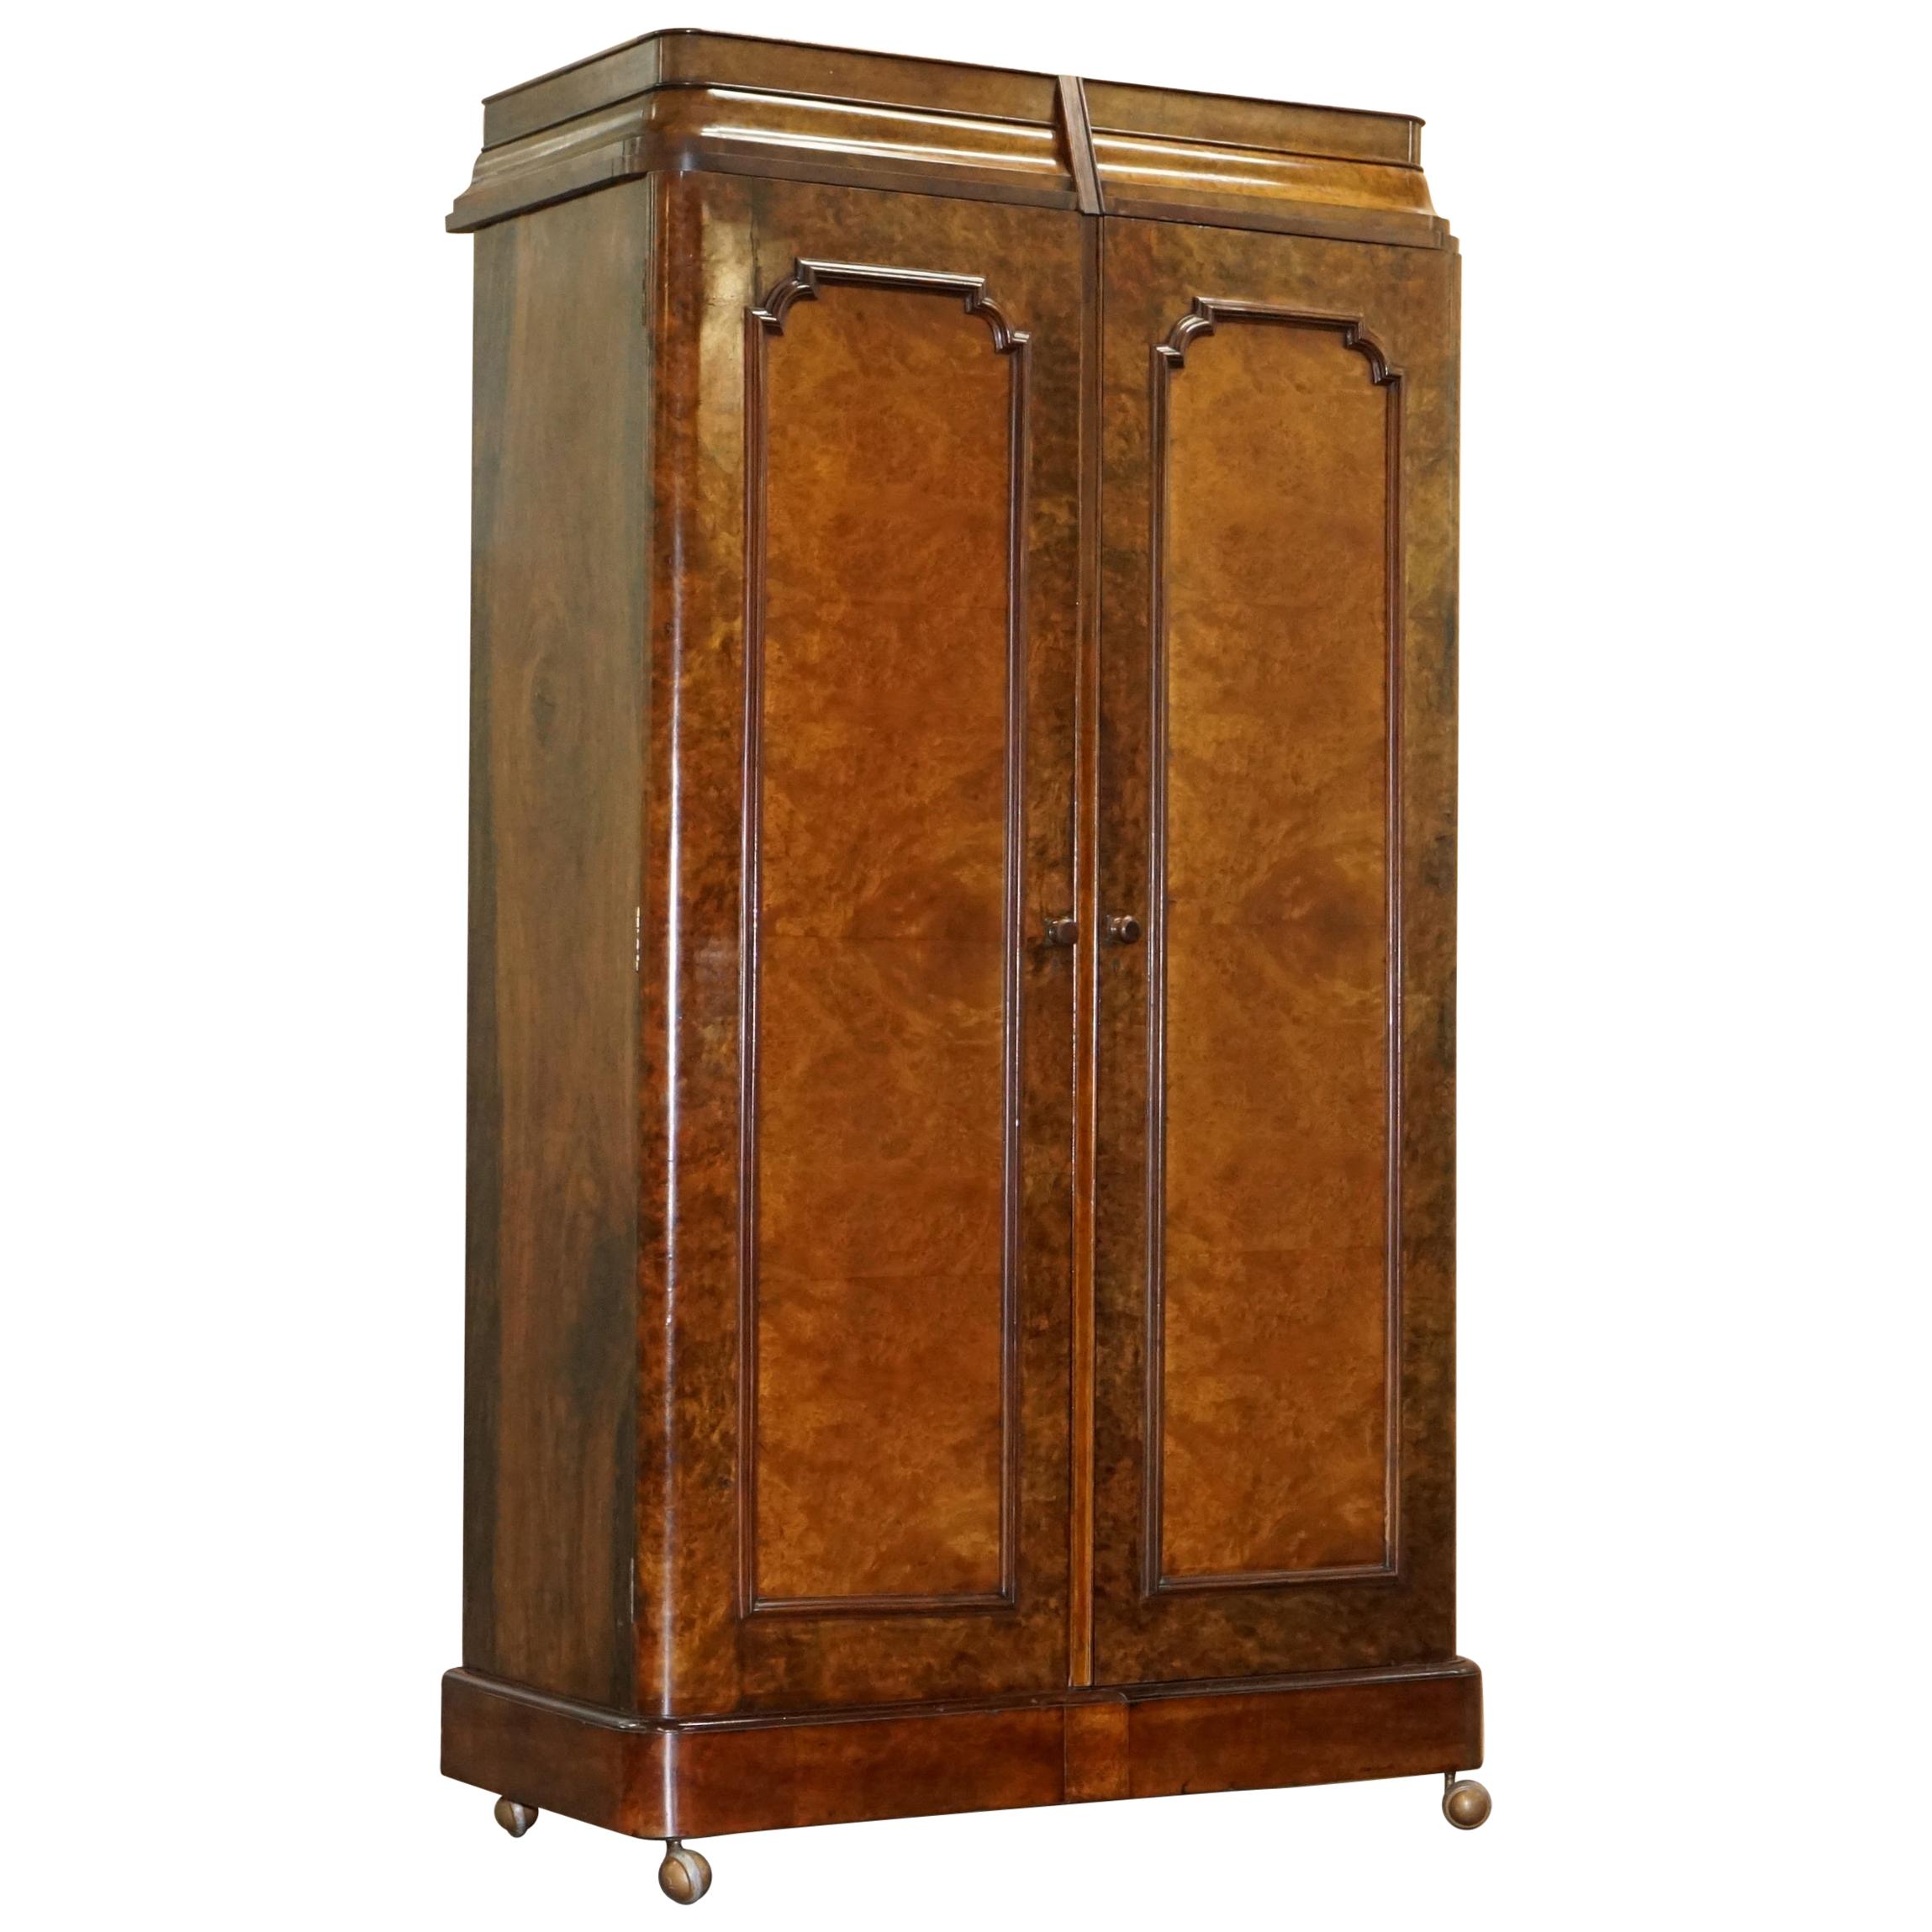 Stunning Victorian Collinge's Burr Walnut Double Wardrobe with Drawers Cupboard